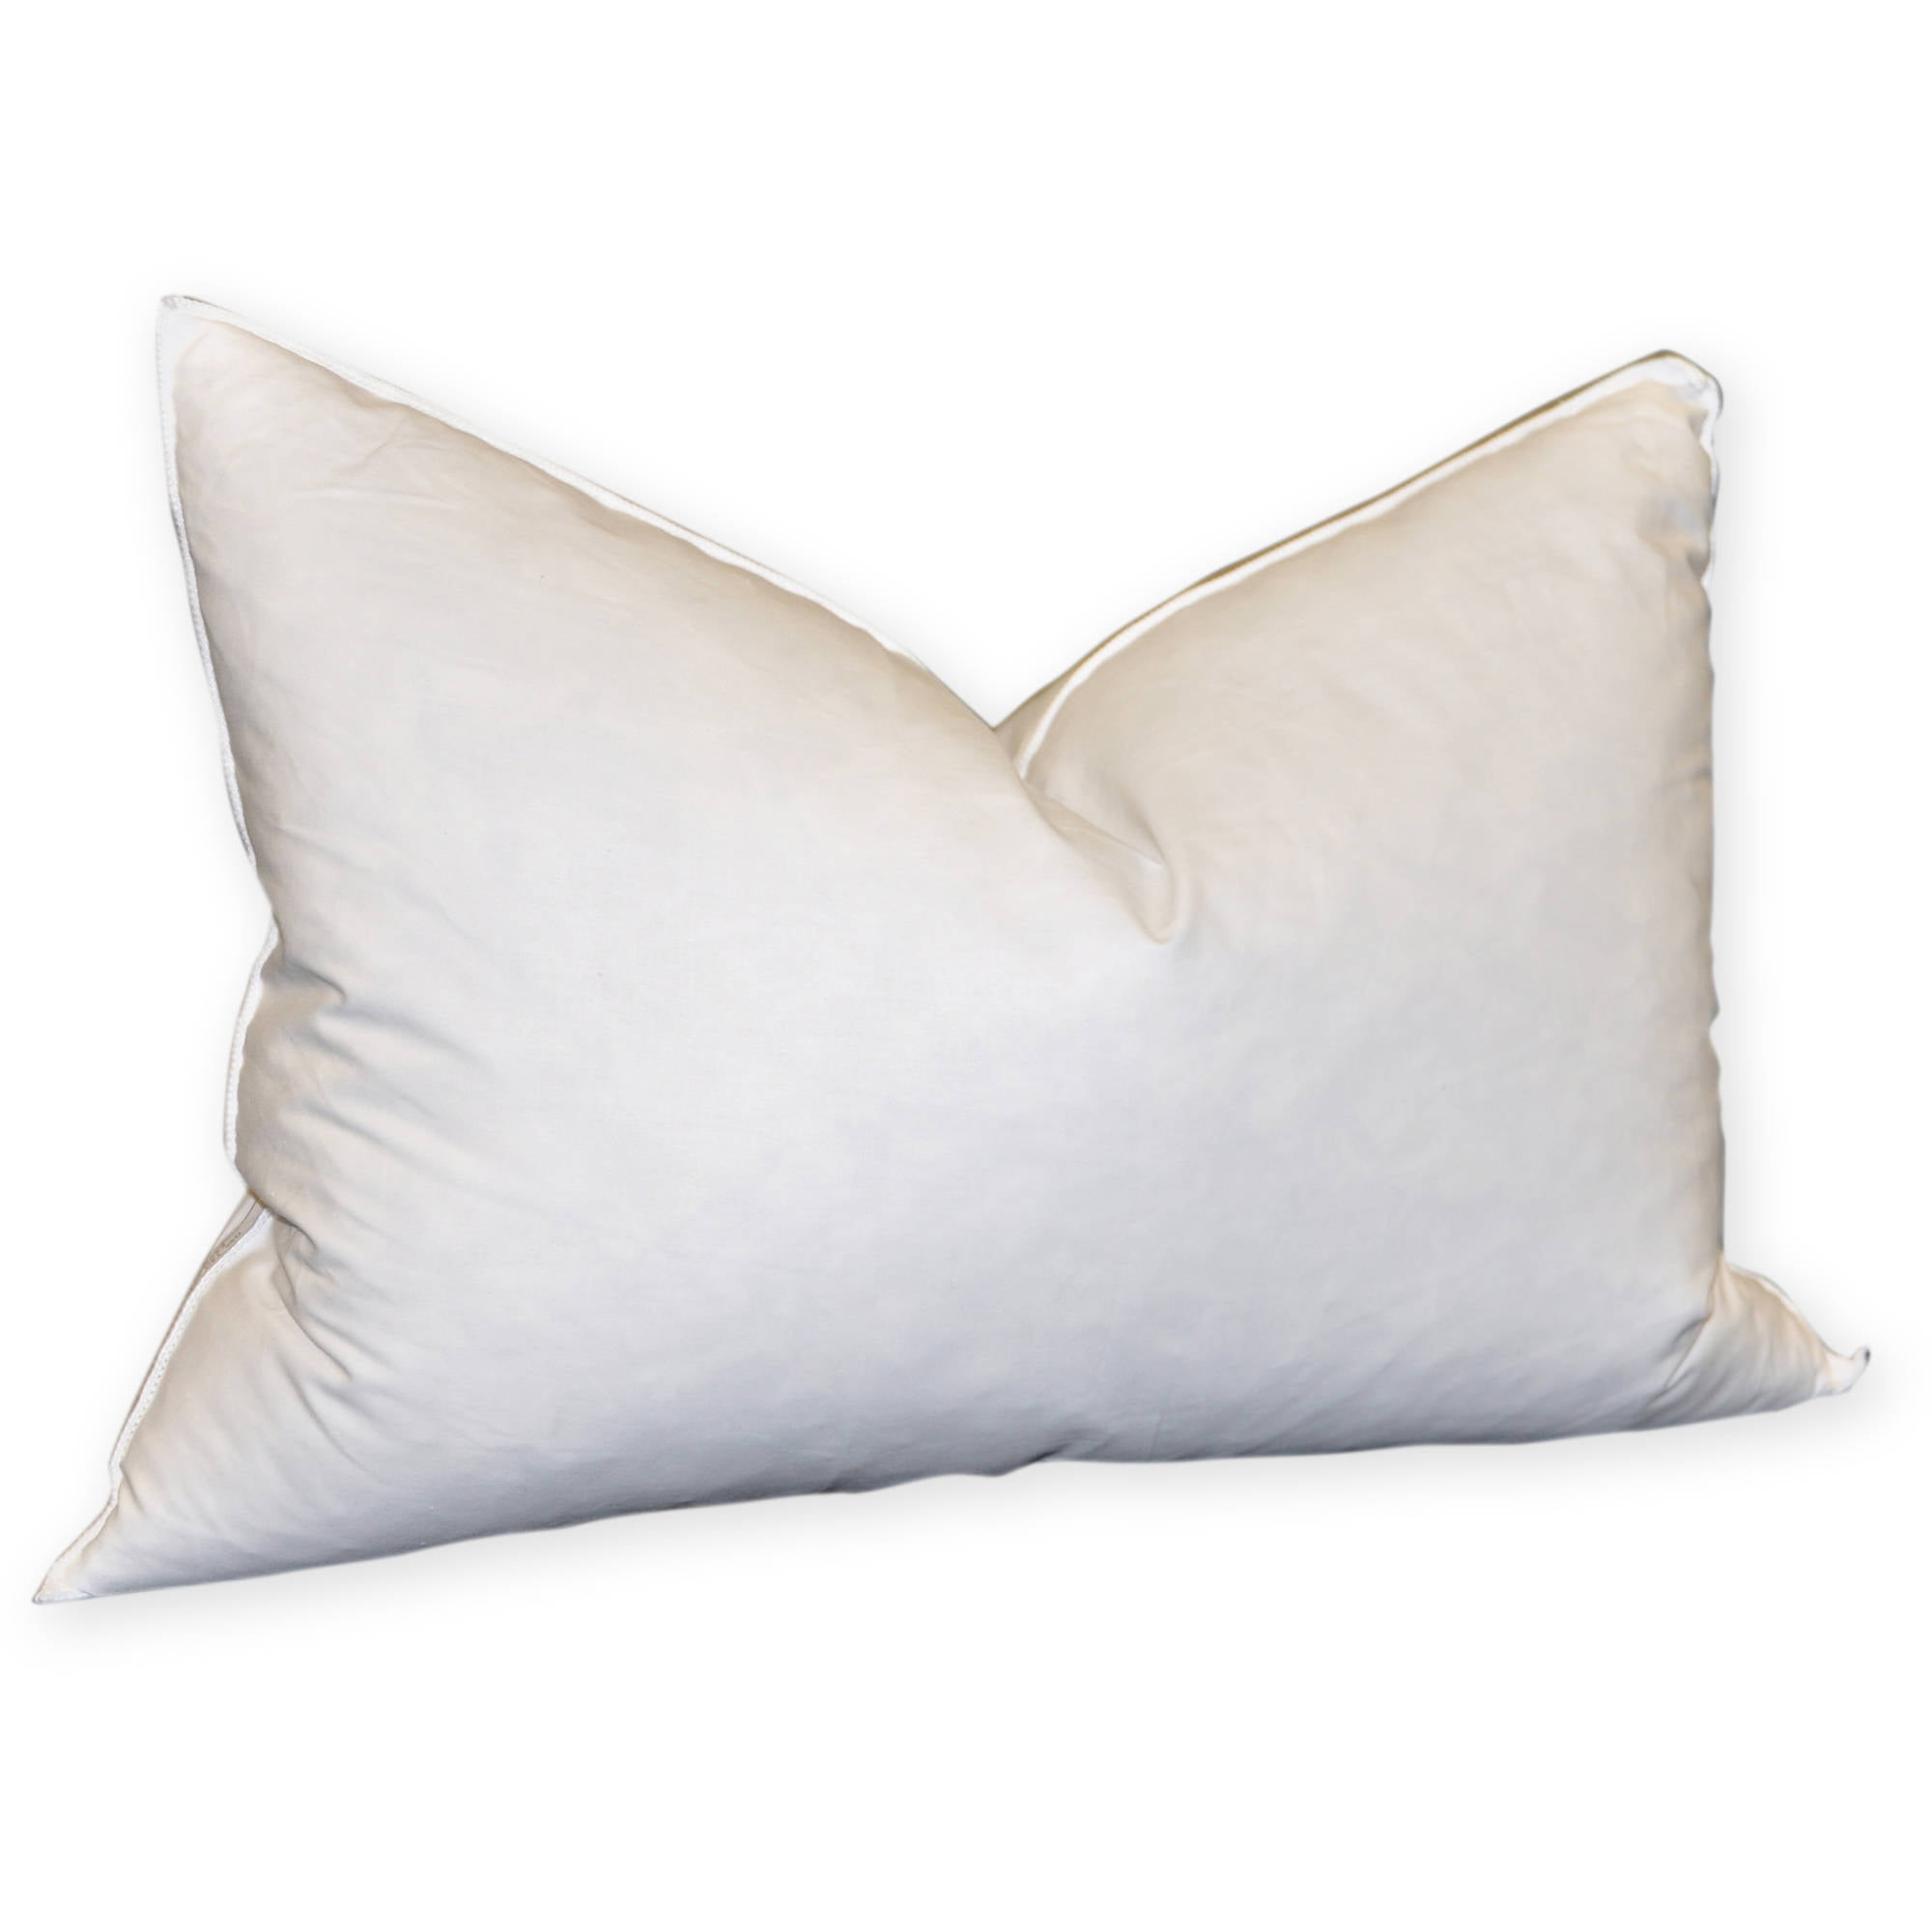 Pure Down Duck Feather 18 in. x 18 in. Pillow Insert (Set of 2)  PD-PI-15002-B - The Home Depot